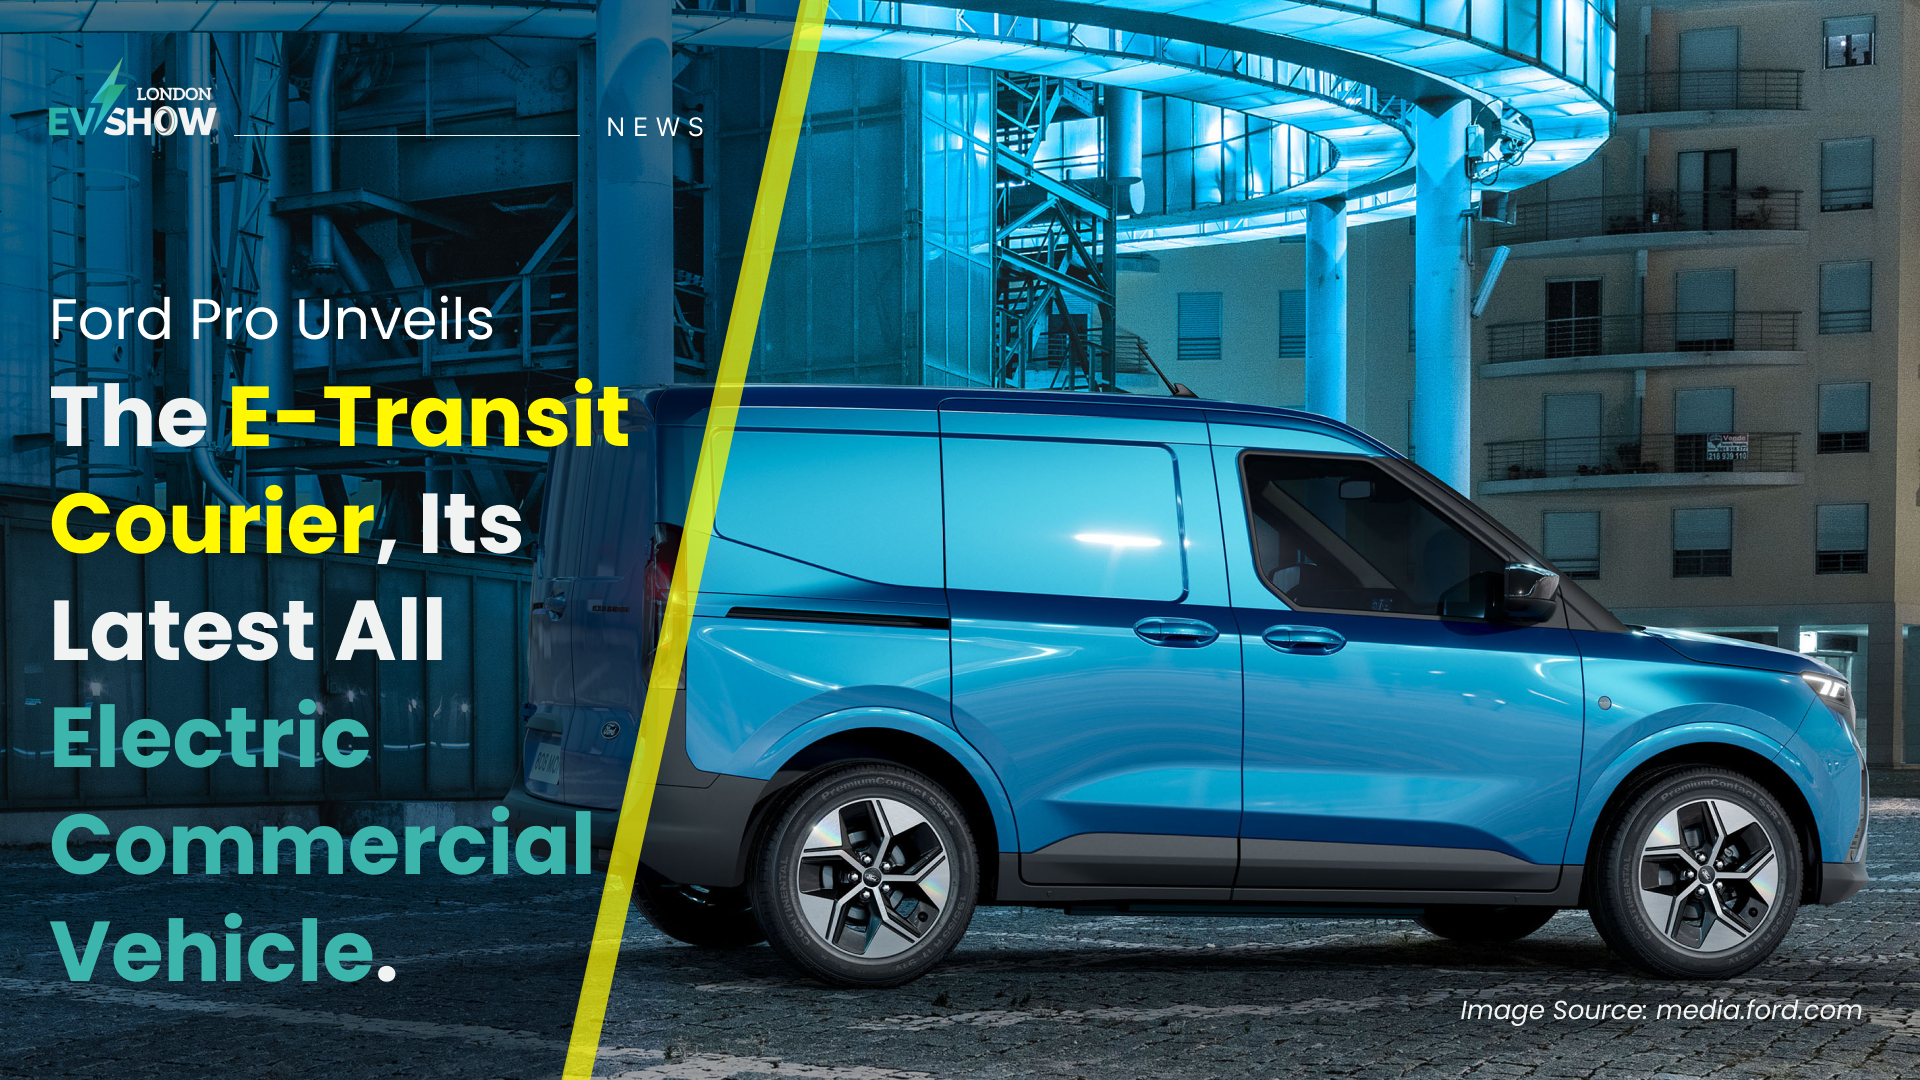 Ford Pro Unveils The E-Transit Courier, Its Latest All Electric Commercial Vehicle.